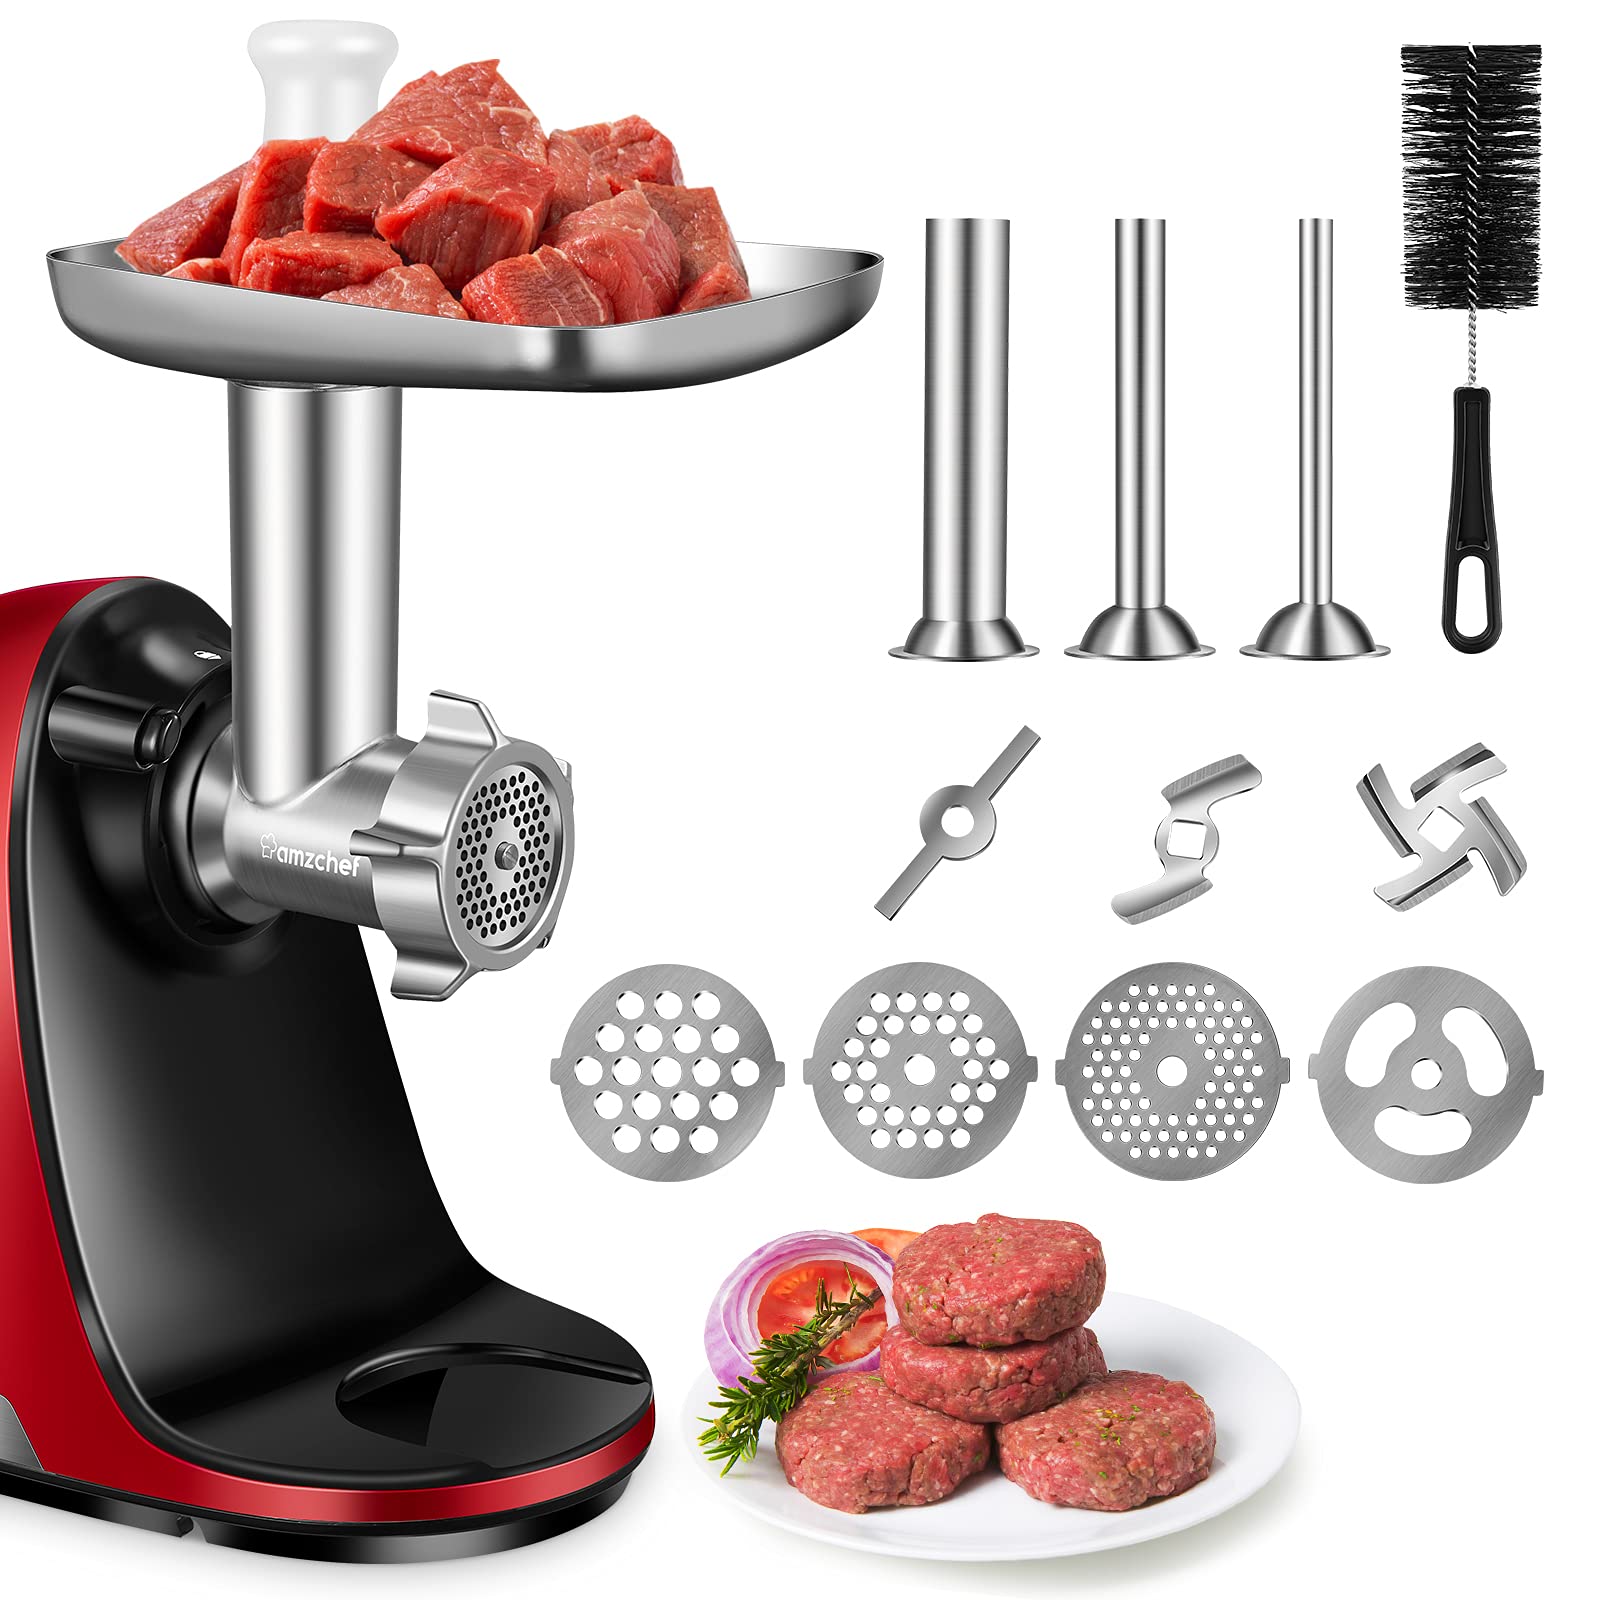 https://cdn.shopify.com/s/files/1/0592/2517/8292/products/AMZCHEFSlowJuicerMetalFoodGrinderAttachment.jpg?v=1645772318&width=1600